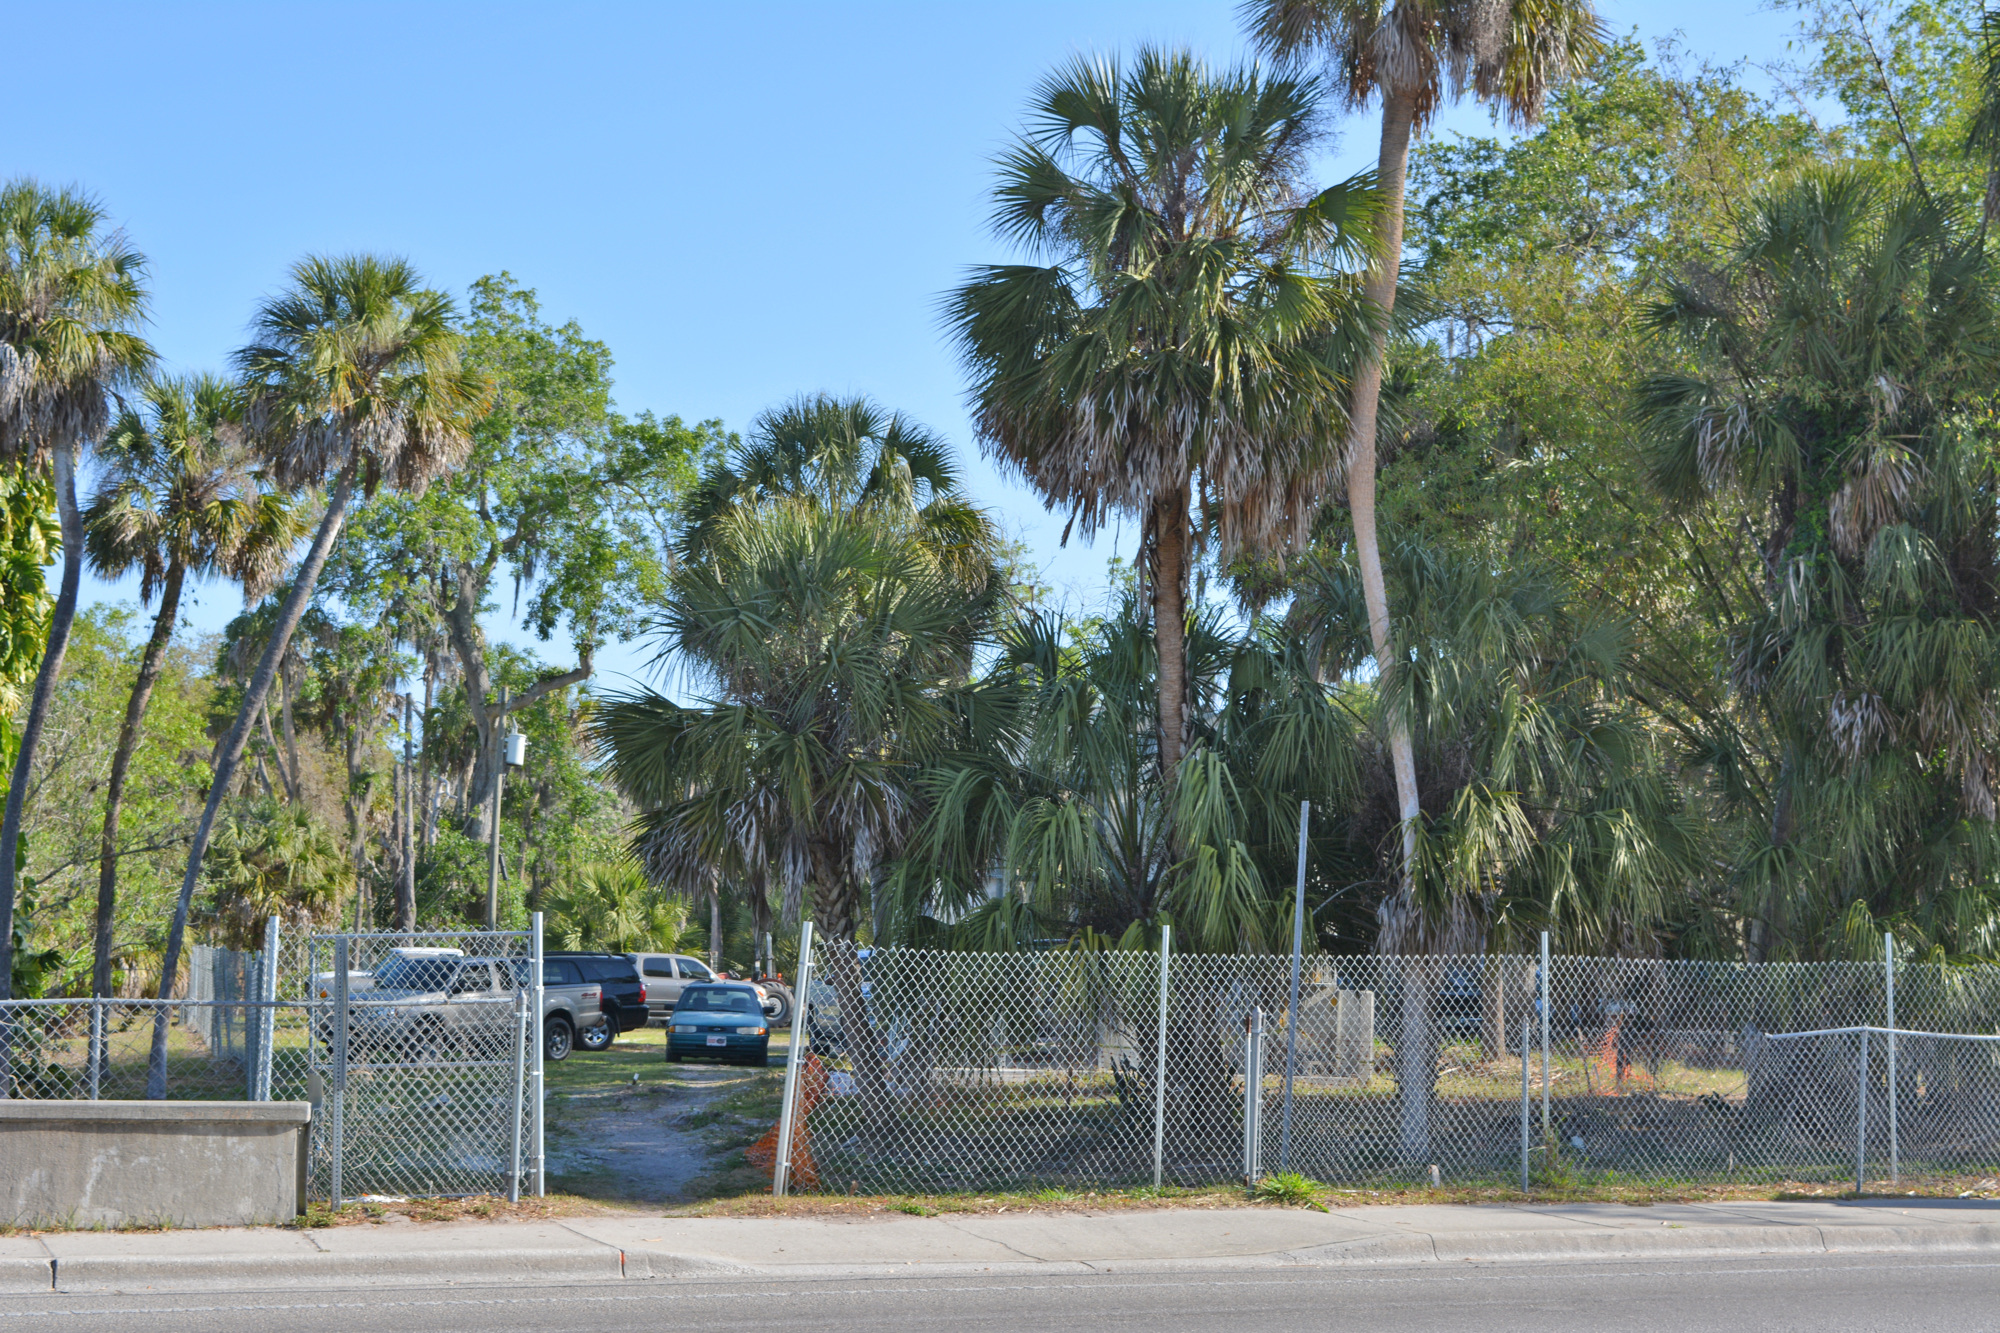 Right now, the future site of new student housing at Ringling College of Art and Design is a staging area for other projects.